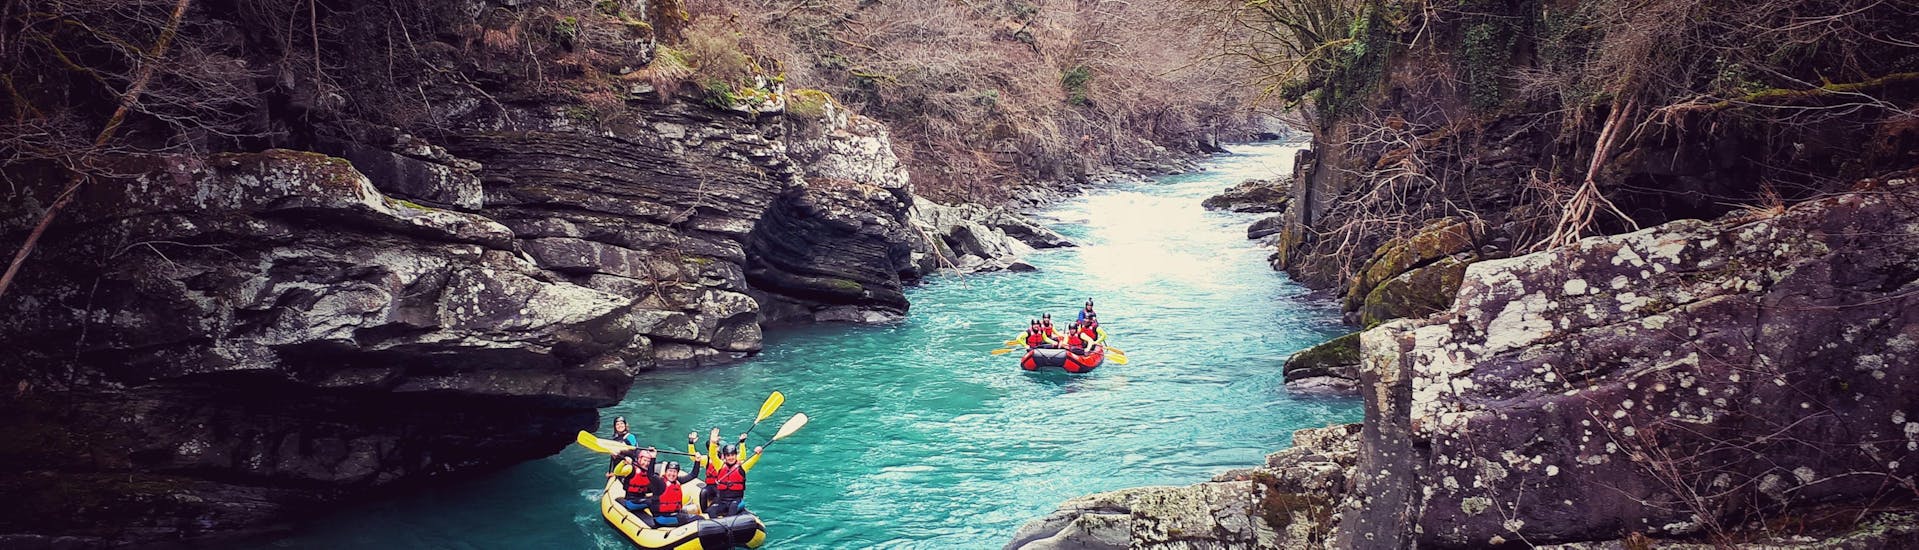 Taking part in the Rafting on the Lima River - Long route gives everyone the chance to admire the beautiful surroundings of the Lima river.